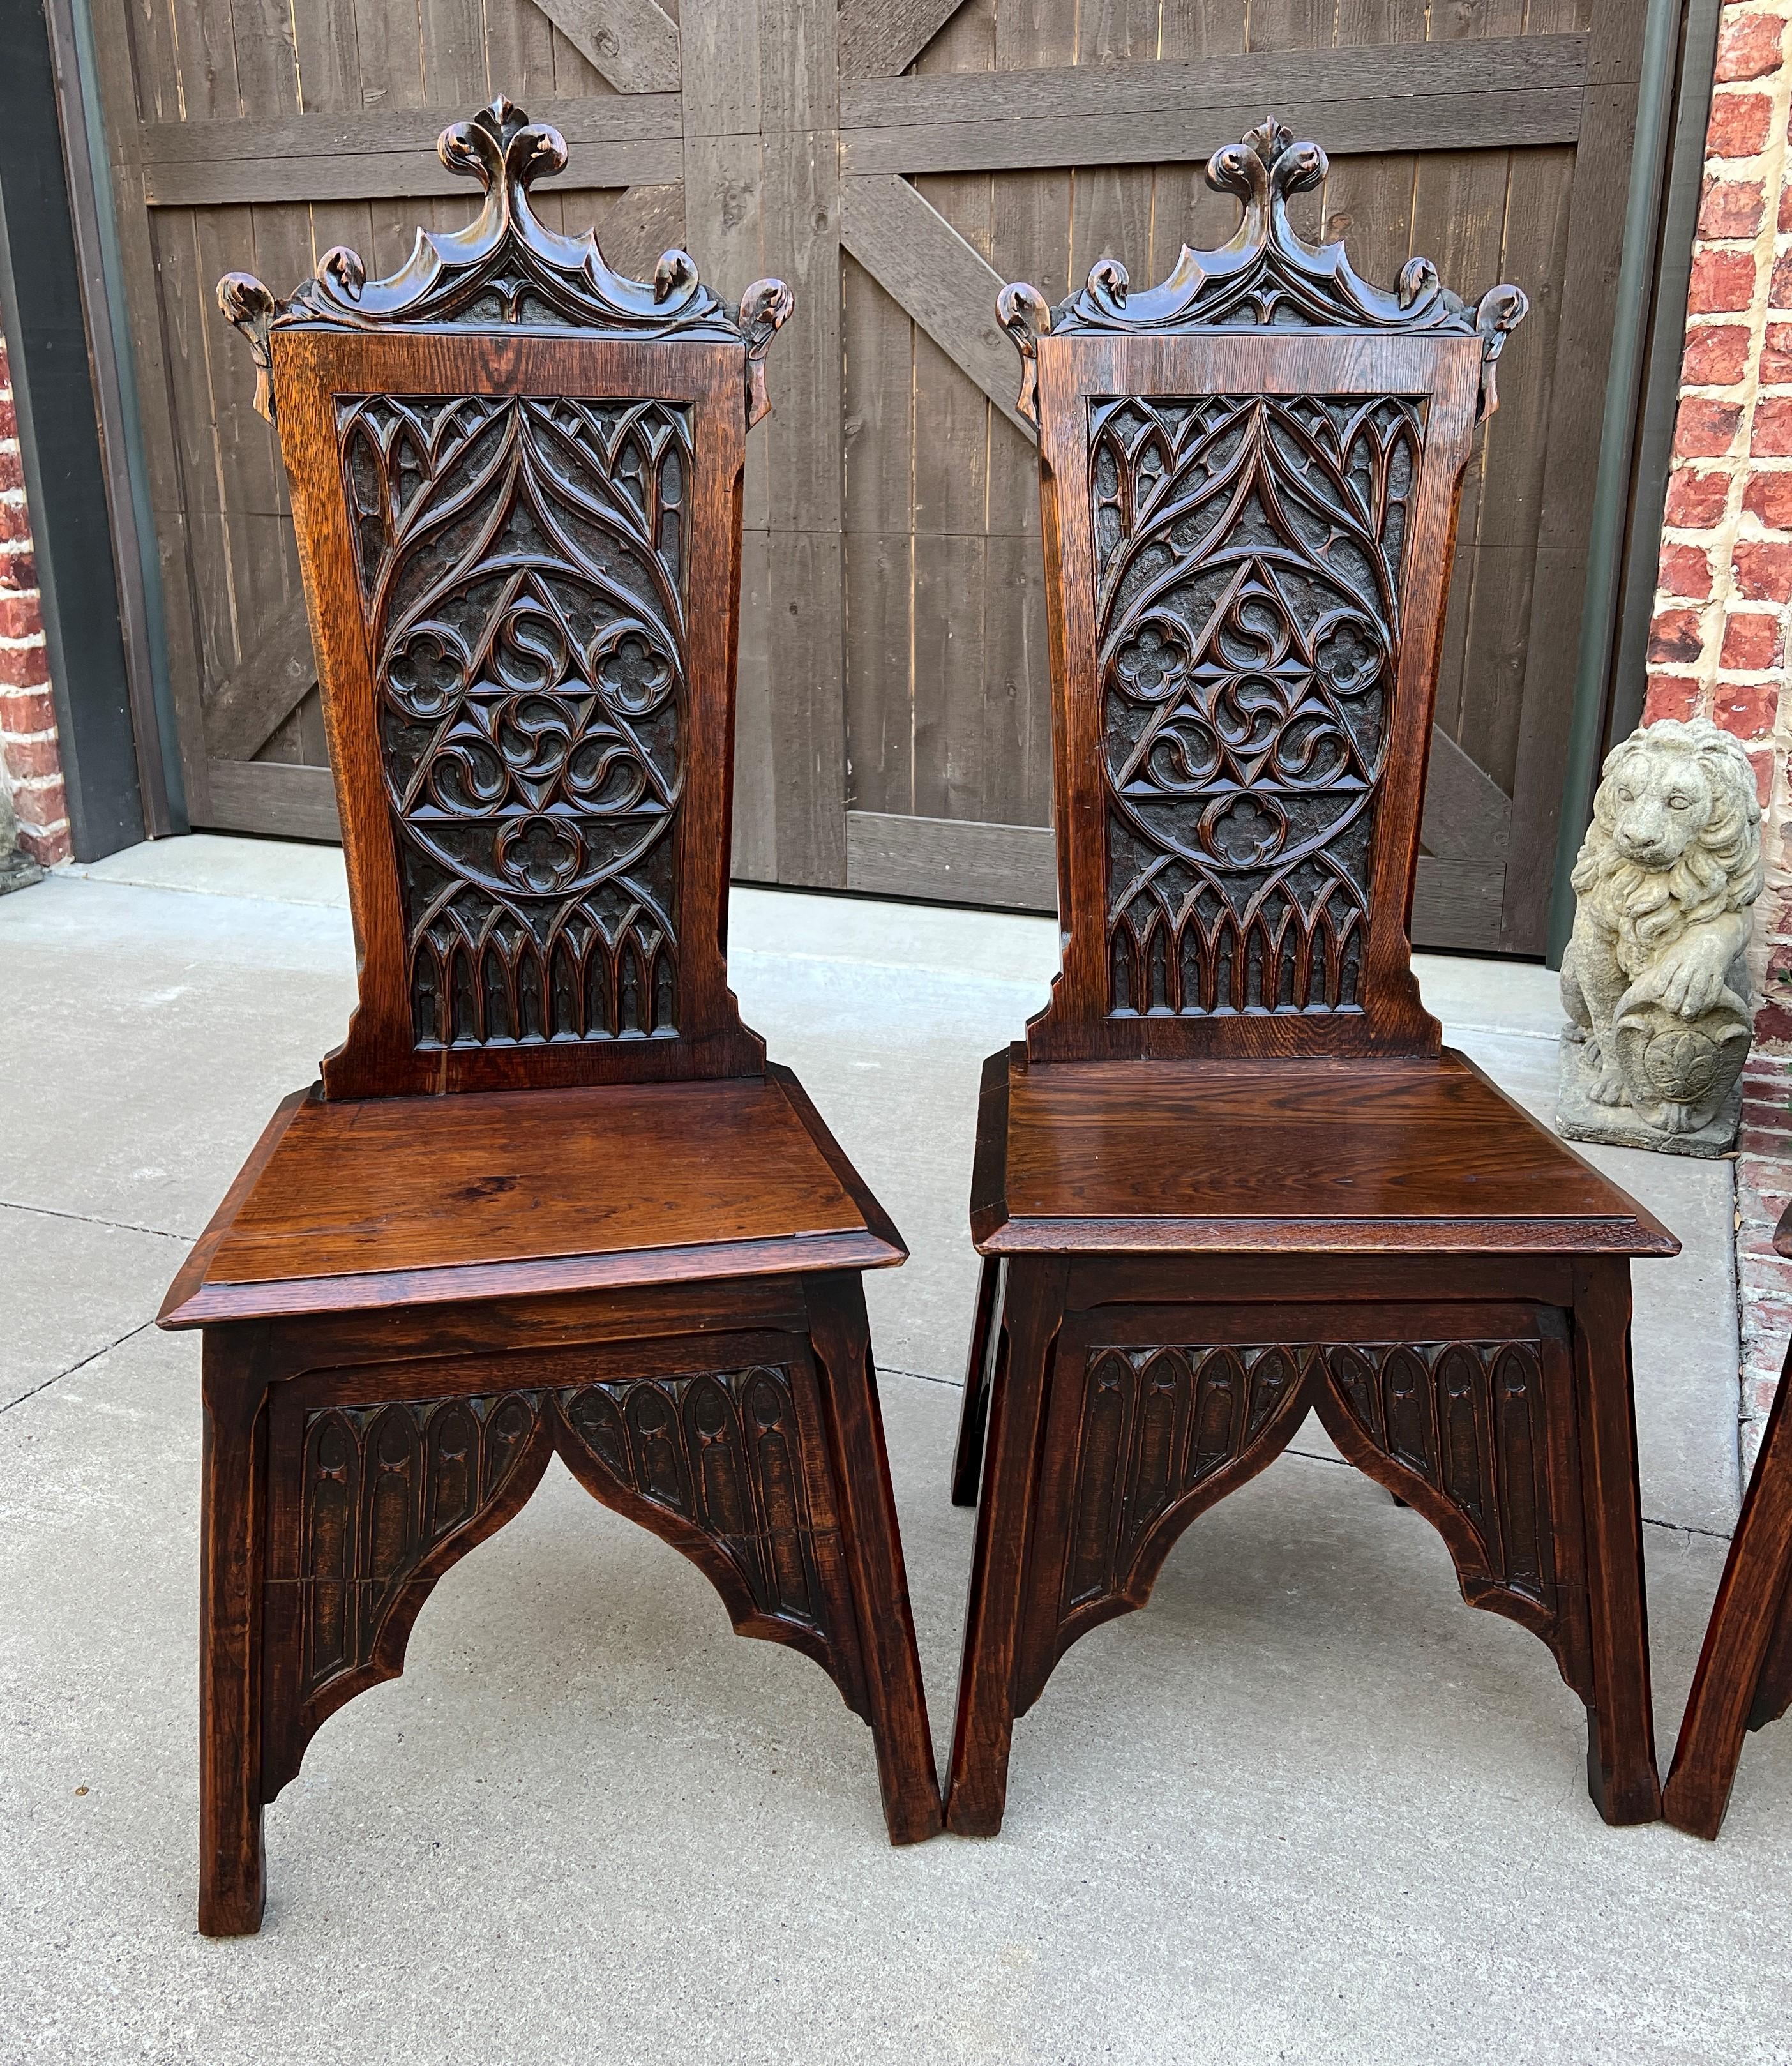 Late 19th Century Antique French Chairs Set of 6 Gothic Revival Oak Pegged Dining Side Chairs 19C